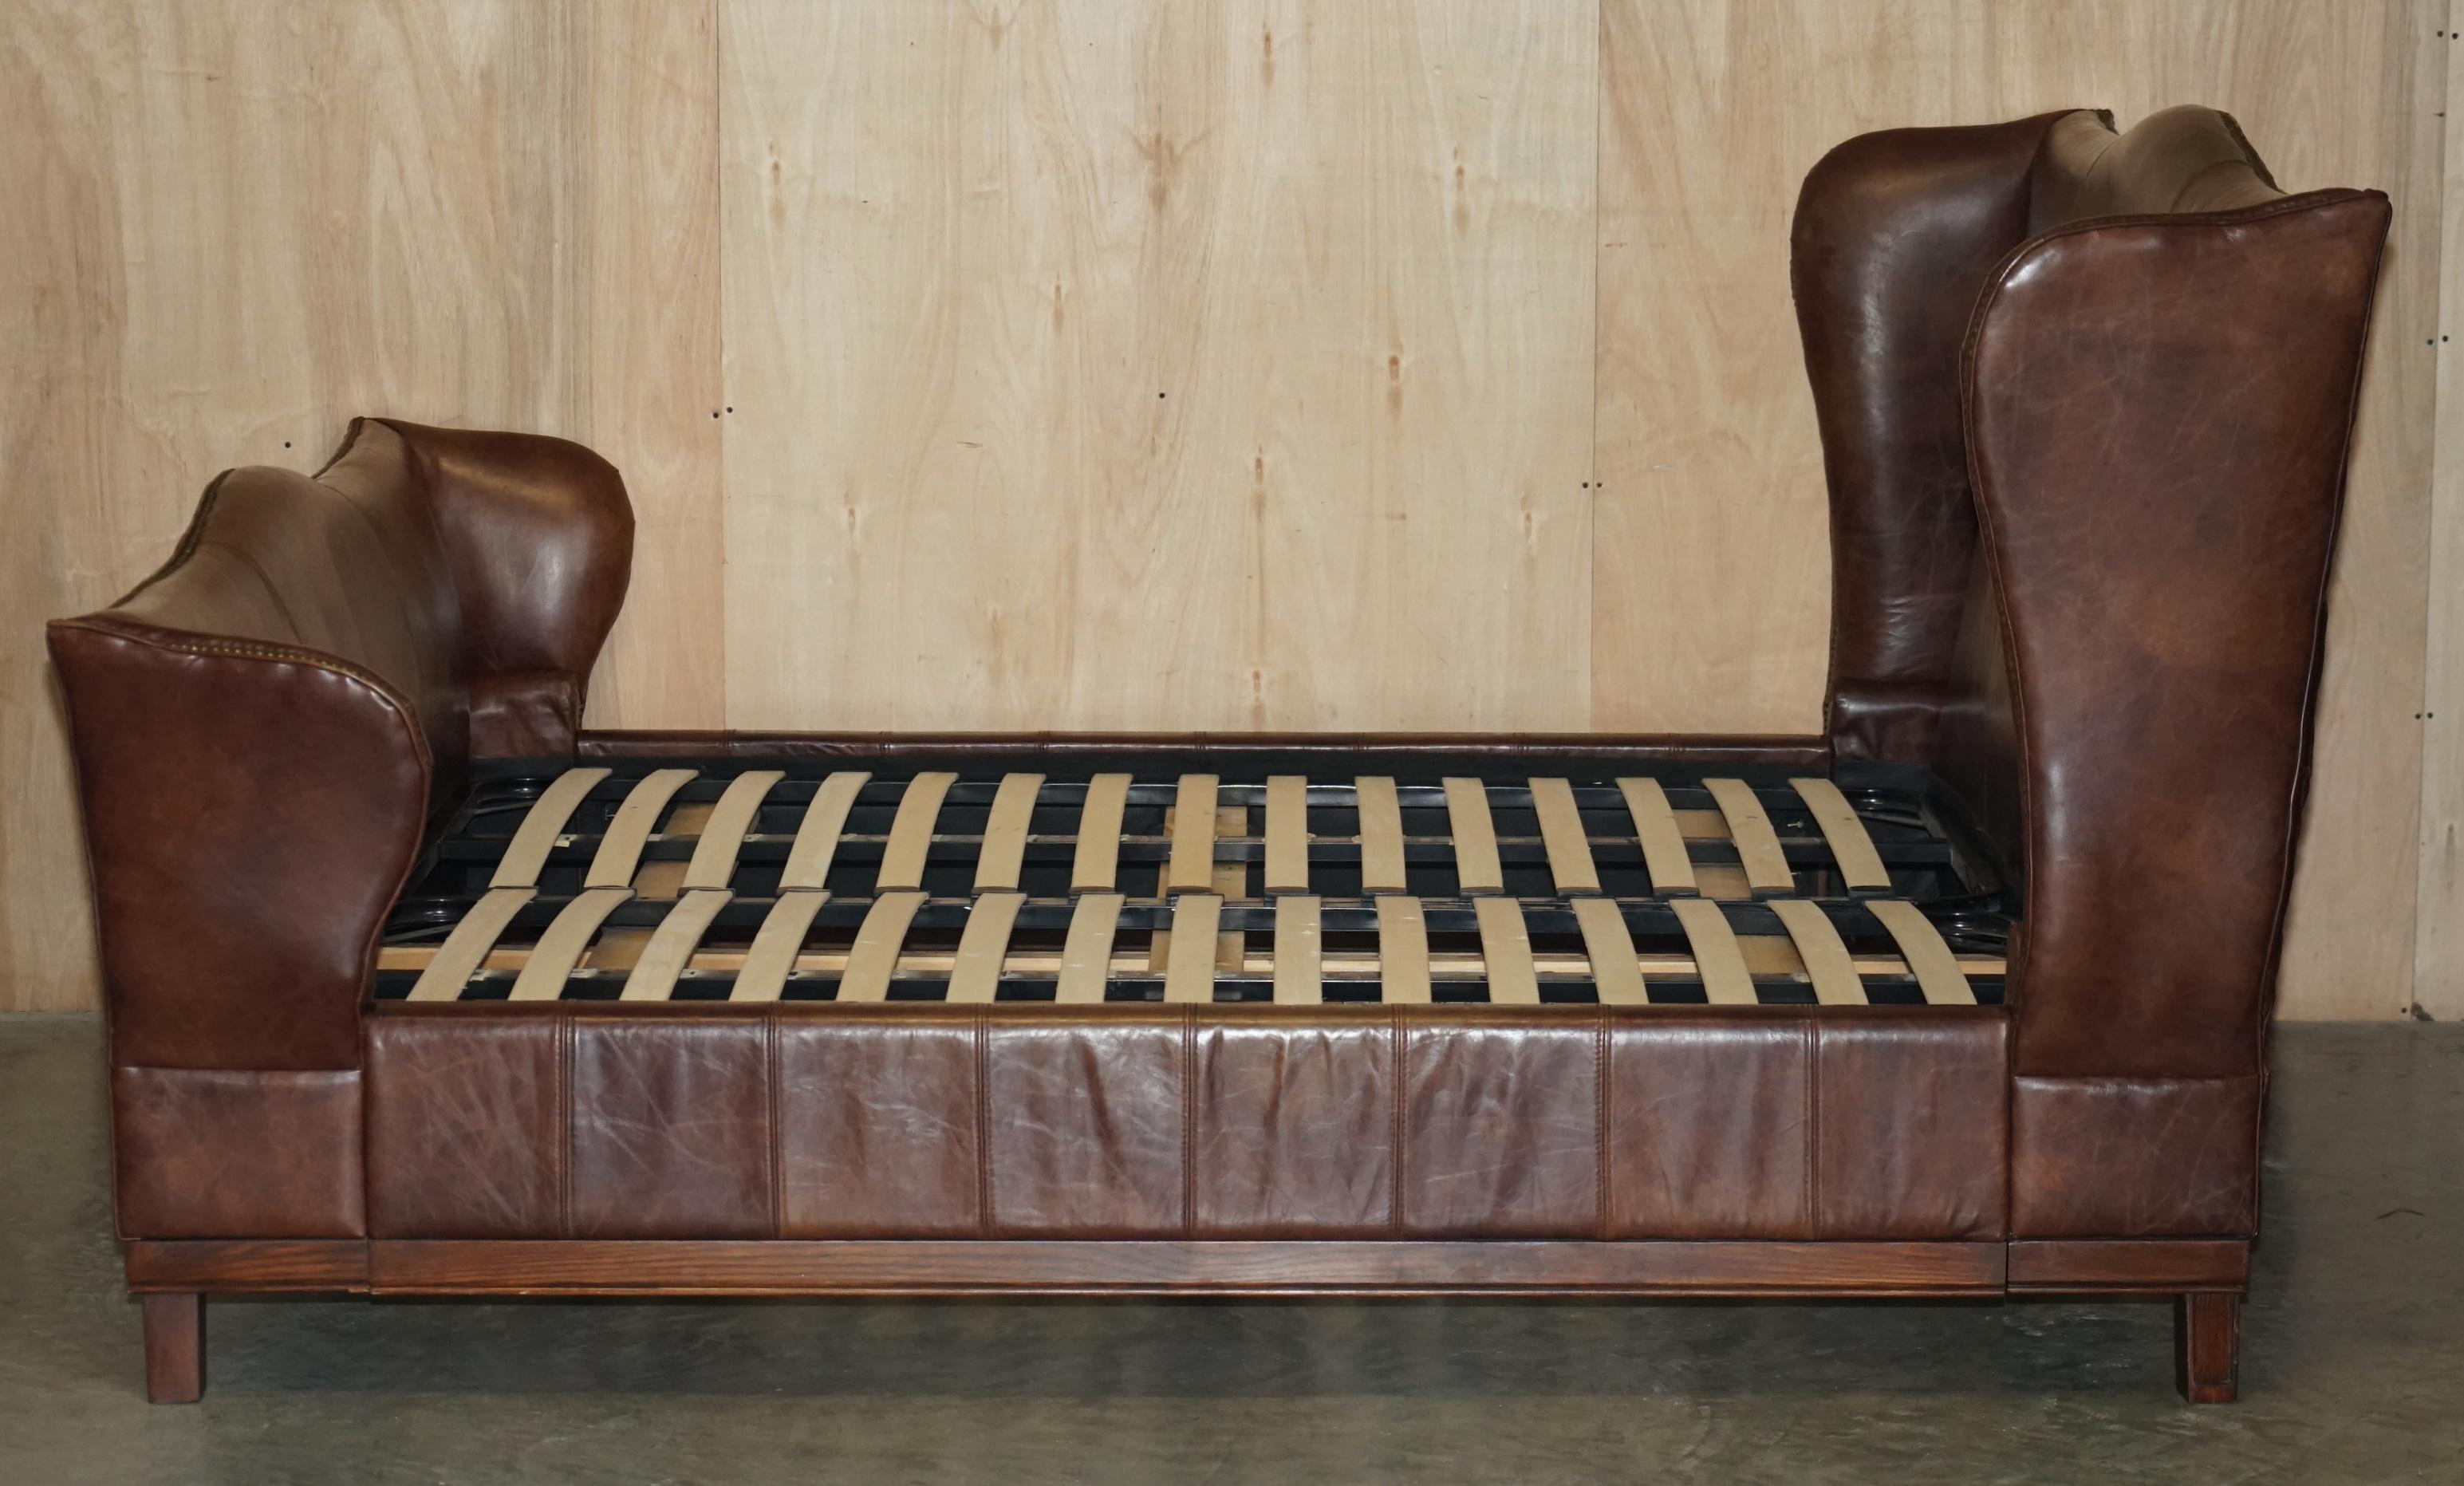 VERY RARE HUGE HAND DYED BROWN LEATHER WiNGBACK SUPER KING SIZE BED FRAME For Sale 6